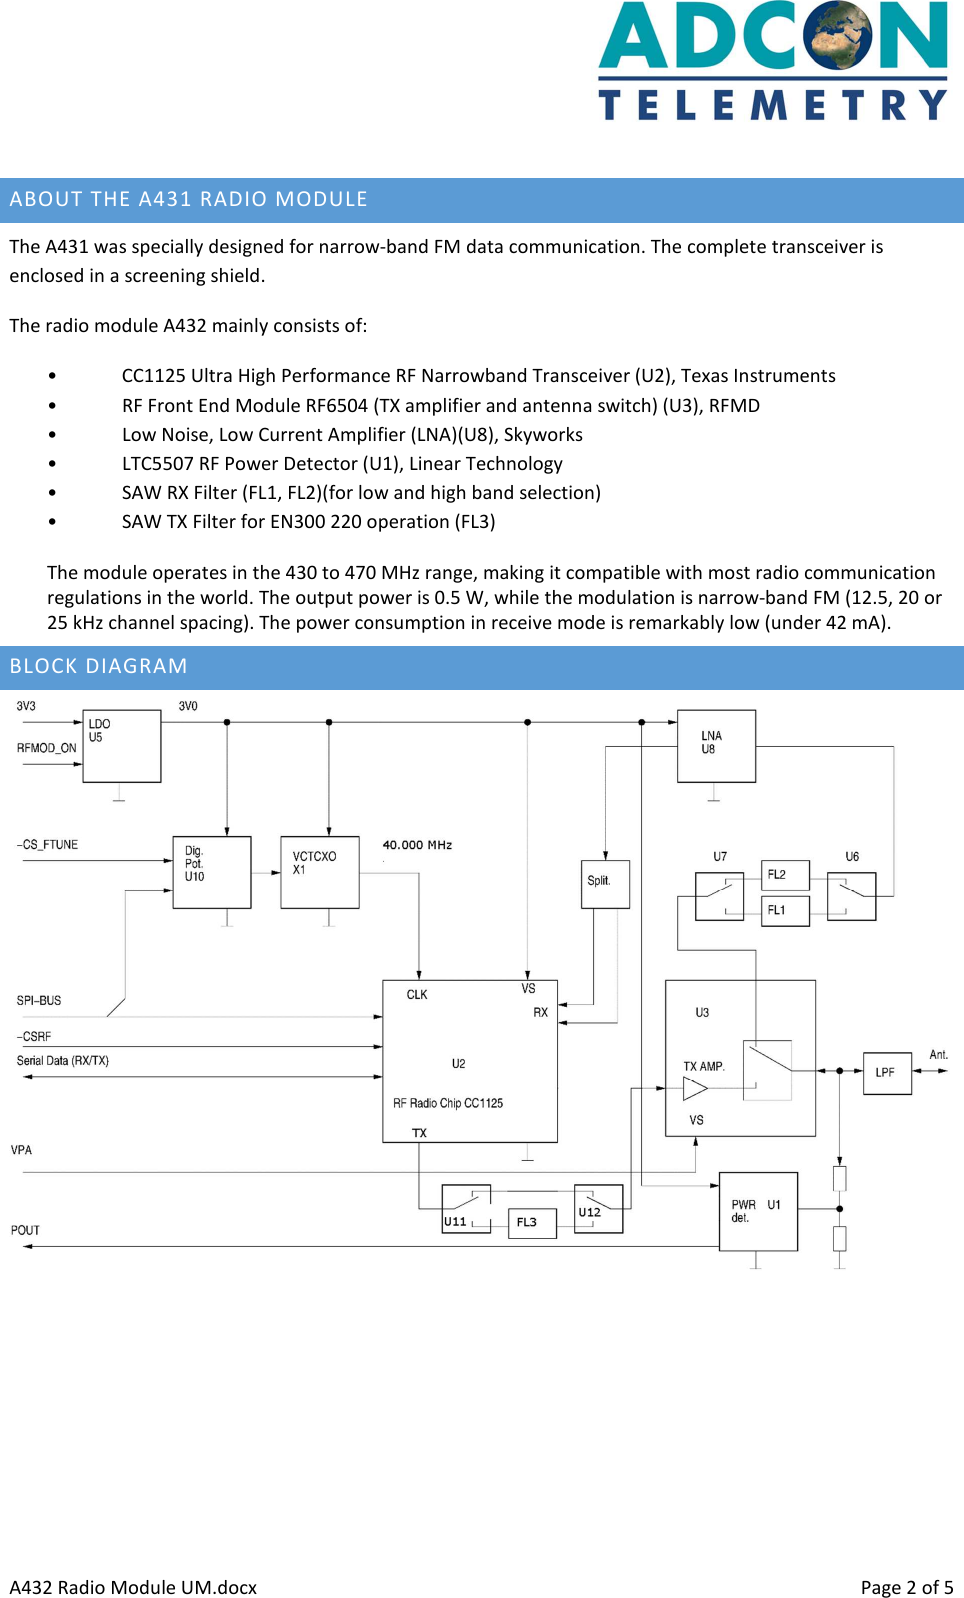      A432 Radio Module UM.docx    Page 2 of 5  ABOUT THE A431 RADIO MODULE The A431 was specially designed for narrow-band FM data communication. The complete transceiver is enclosed in a screening shield. The radio module A432 mainly consists of: • CC1125 Ultra High Performance RF Narrowband Transceiver (U2), Texas Instruments • RF Front End Module RF6504 (TX amplifier and antenna switch) (U3), RFMD • Low Noise, Low Current Amplifier (LNA)(U8), Skyworks • LTC5507 RF Power Detector (U1), Linear Technology • SAW RX Filter (FL1, FL2)(for low and high band selection) • SAW TX Filter for EN300 220 operation (FL3) The module operates in the 430 to 470 MHz range, making it compatible with most radio communication regulations in the world. The output power is 0.5 W, while the modulation is narrow-band FM (12.5, 20 or 25 kHz channel spacing). The power consumption in receive mode is remarkably low (under 42 mA). BLOCK DIAGRAM     